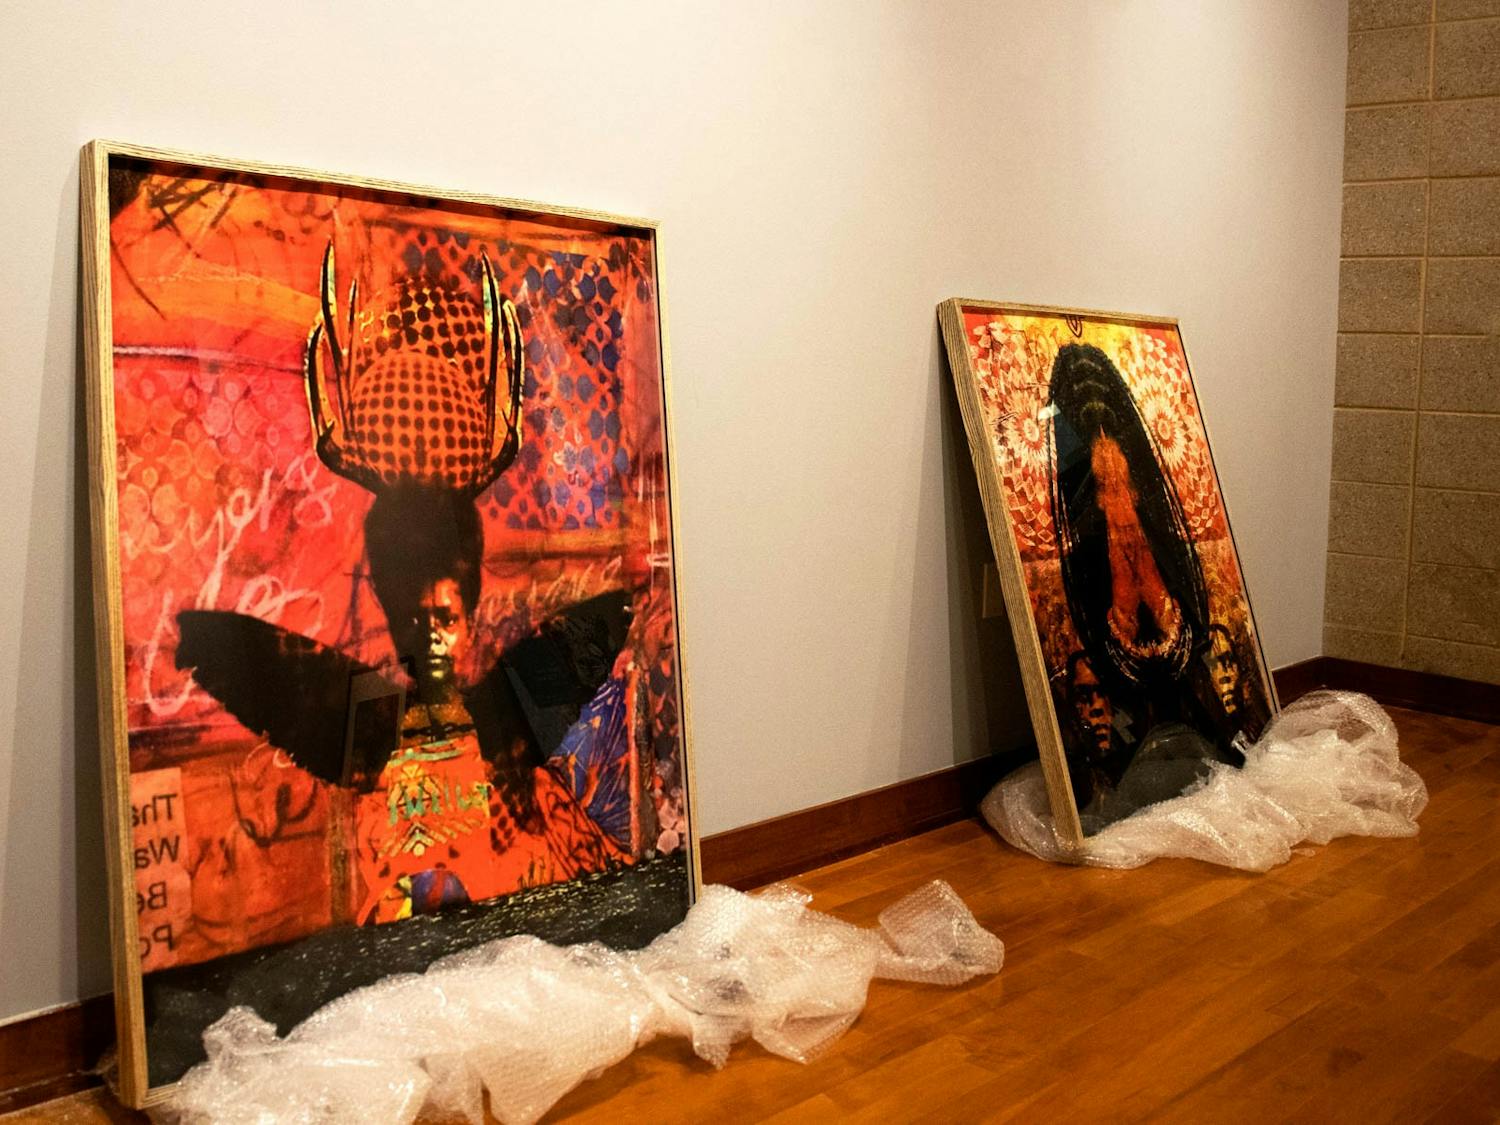 Prints in the process of being installed in the Stone Center's Brown gallery as a part of Anike Robinson's Gris Gris Gurlz exhibition, photographed on Monday, Sept. 19, 2022.